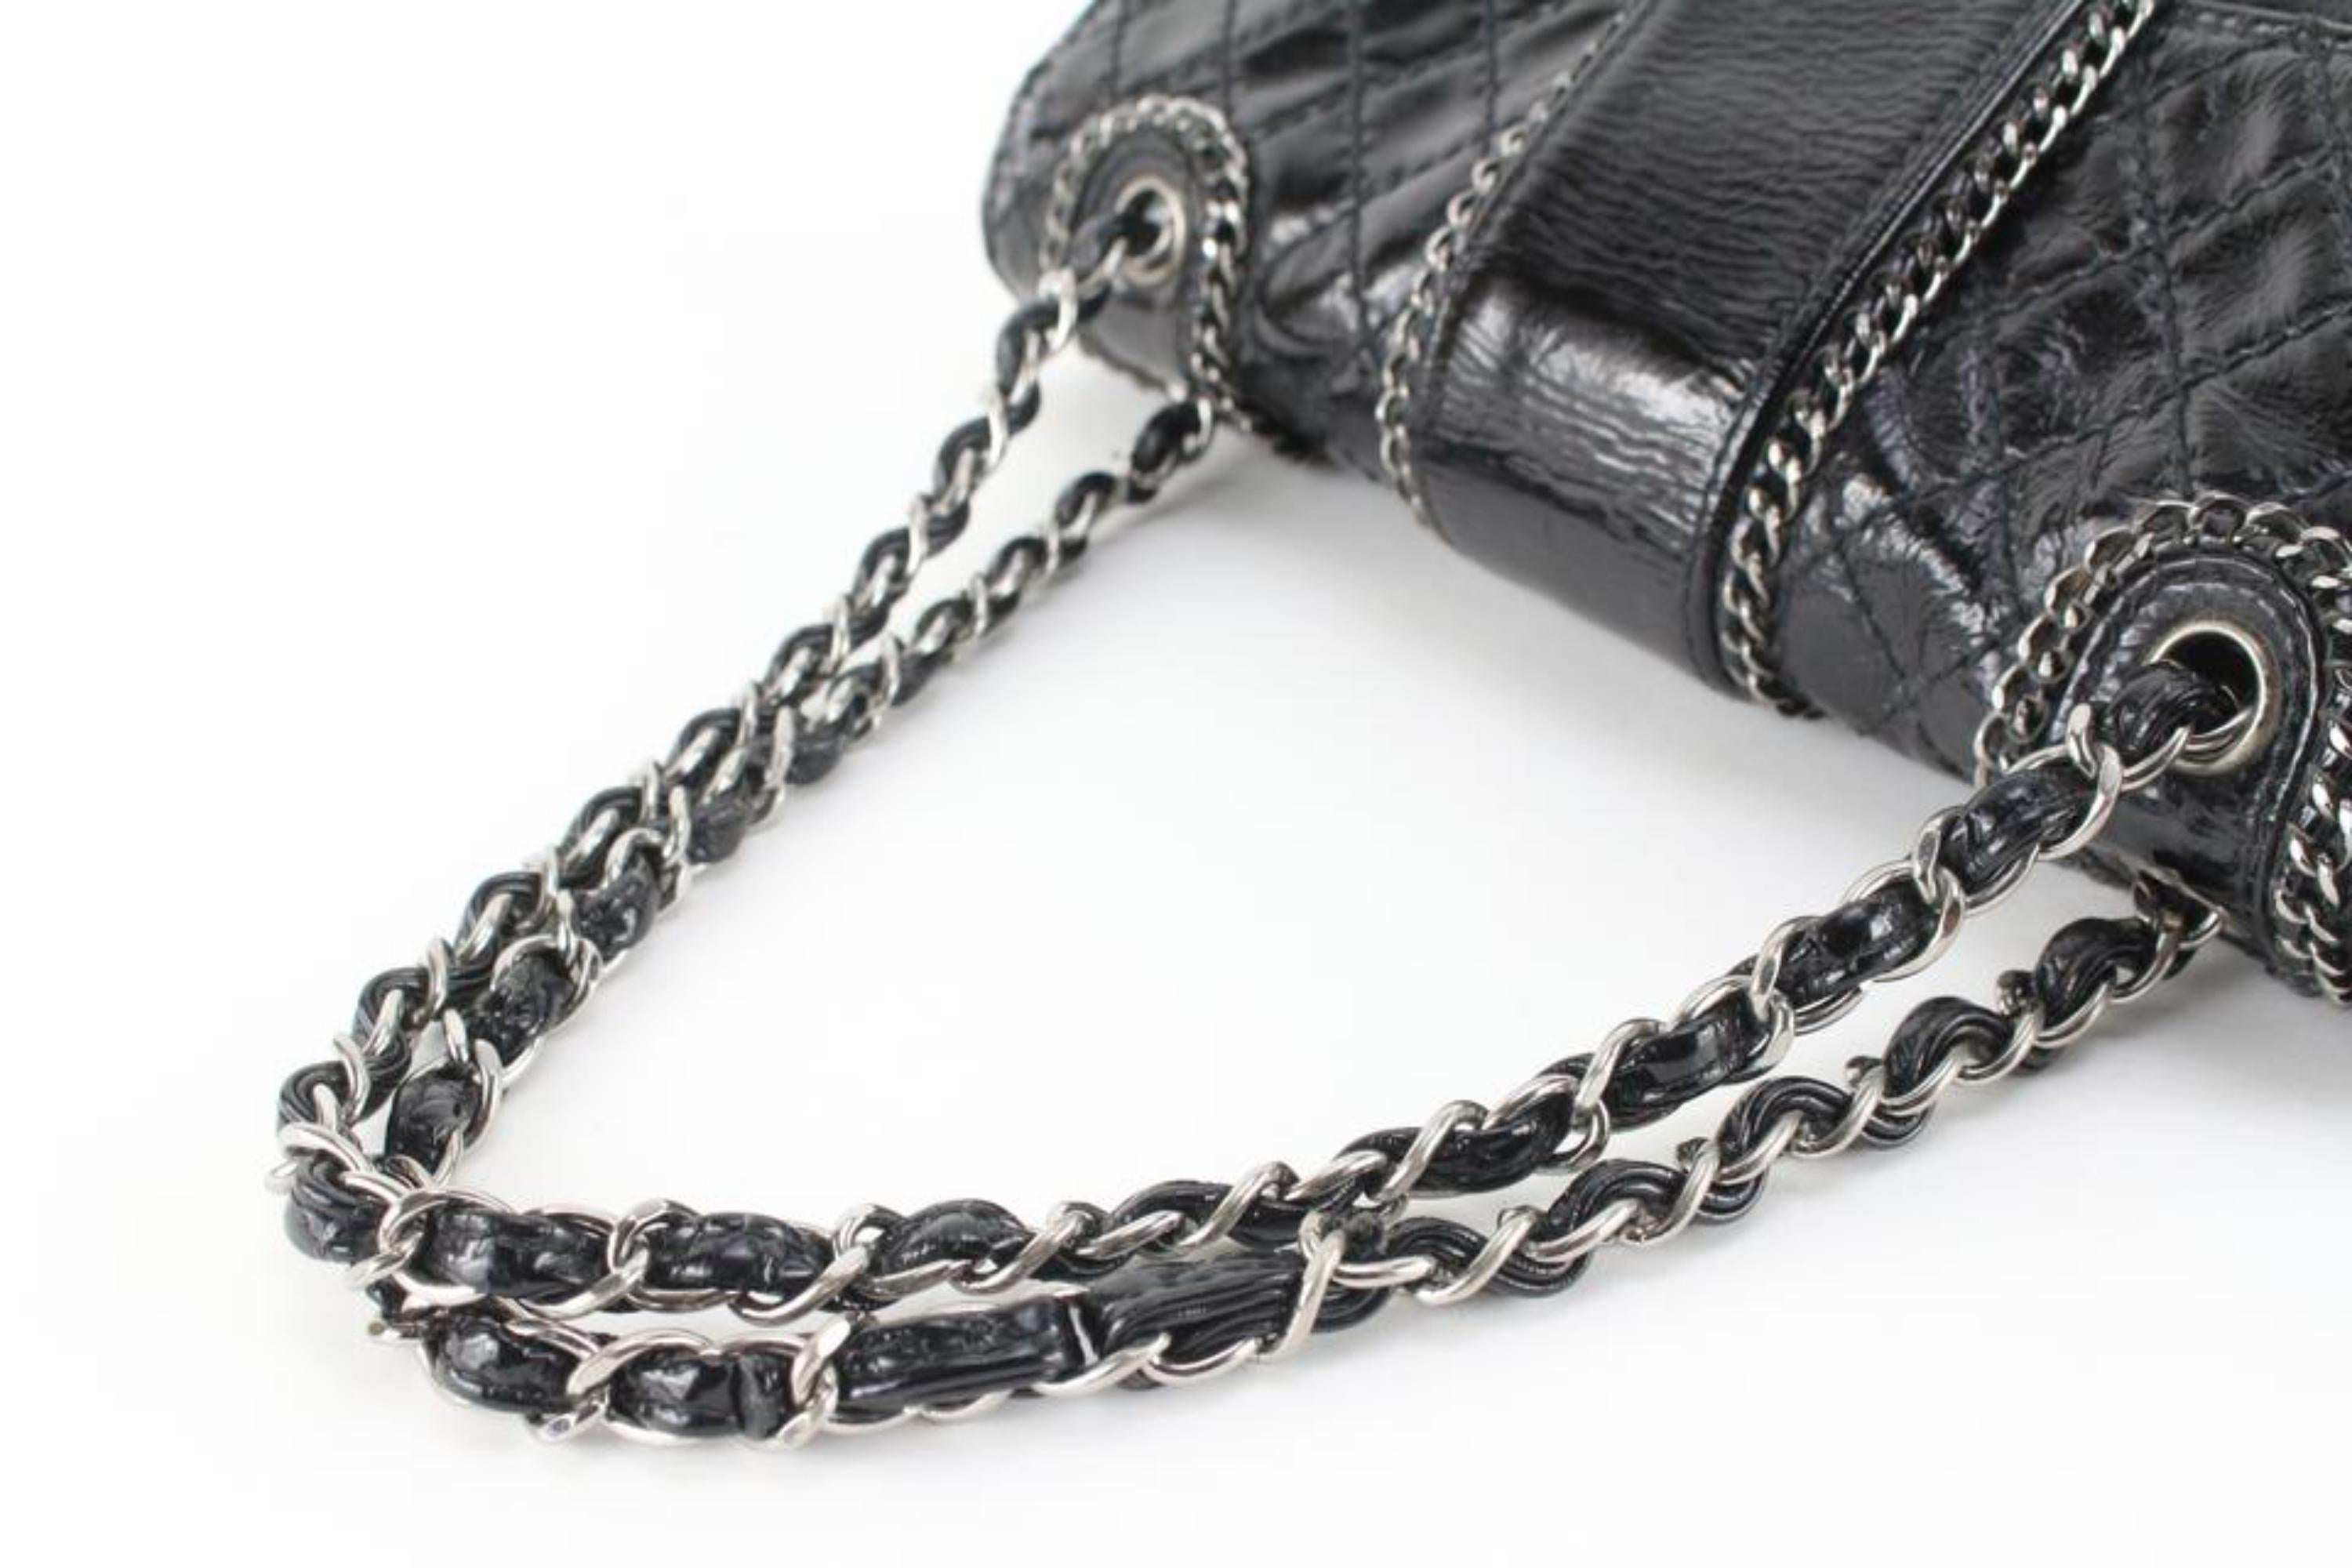 Chanel Quilted Black Patent Chain Around Medium Flap 18cc830s 5